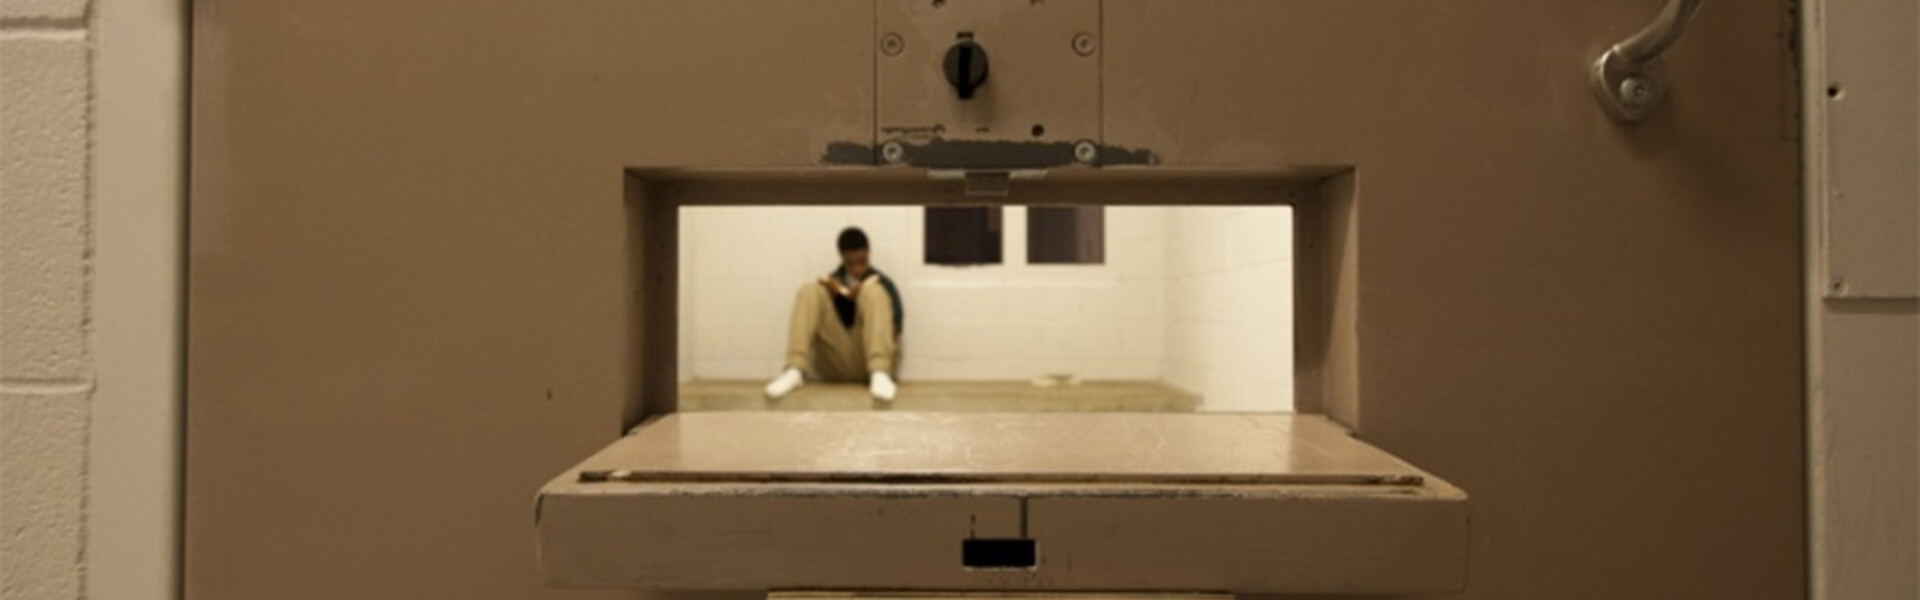 Looking though the food pass door of a jail cell with an inmate sitting on the floor.